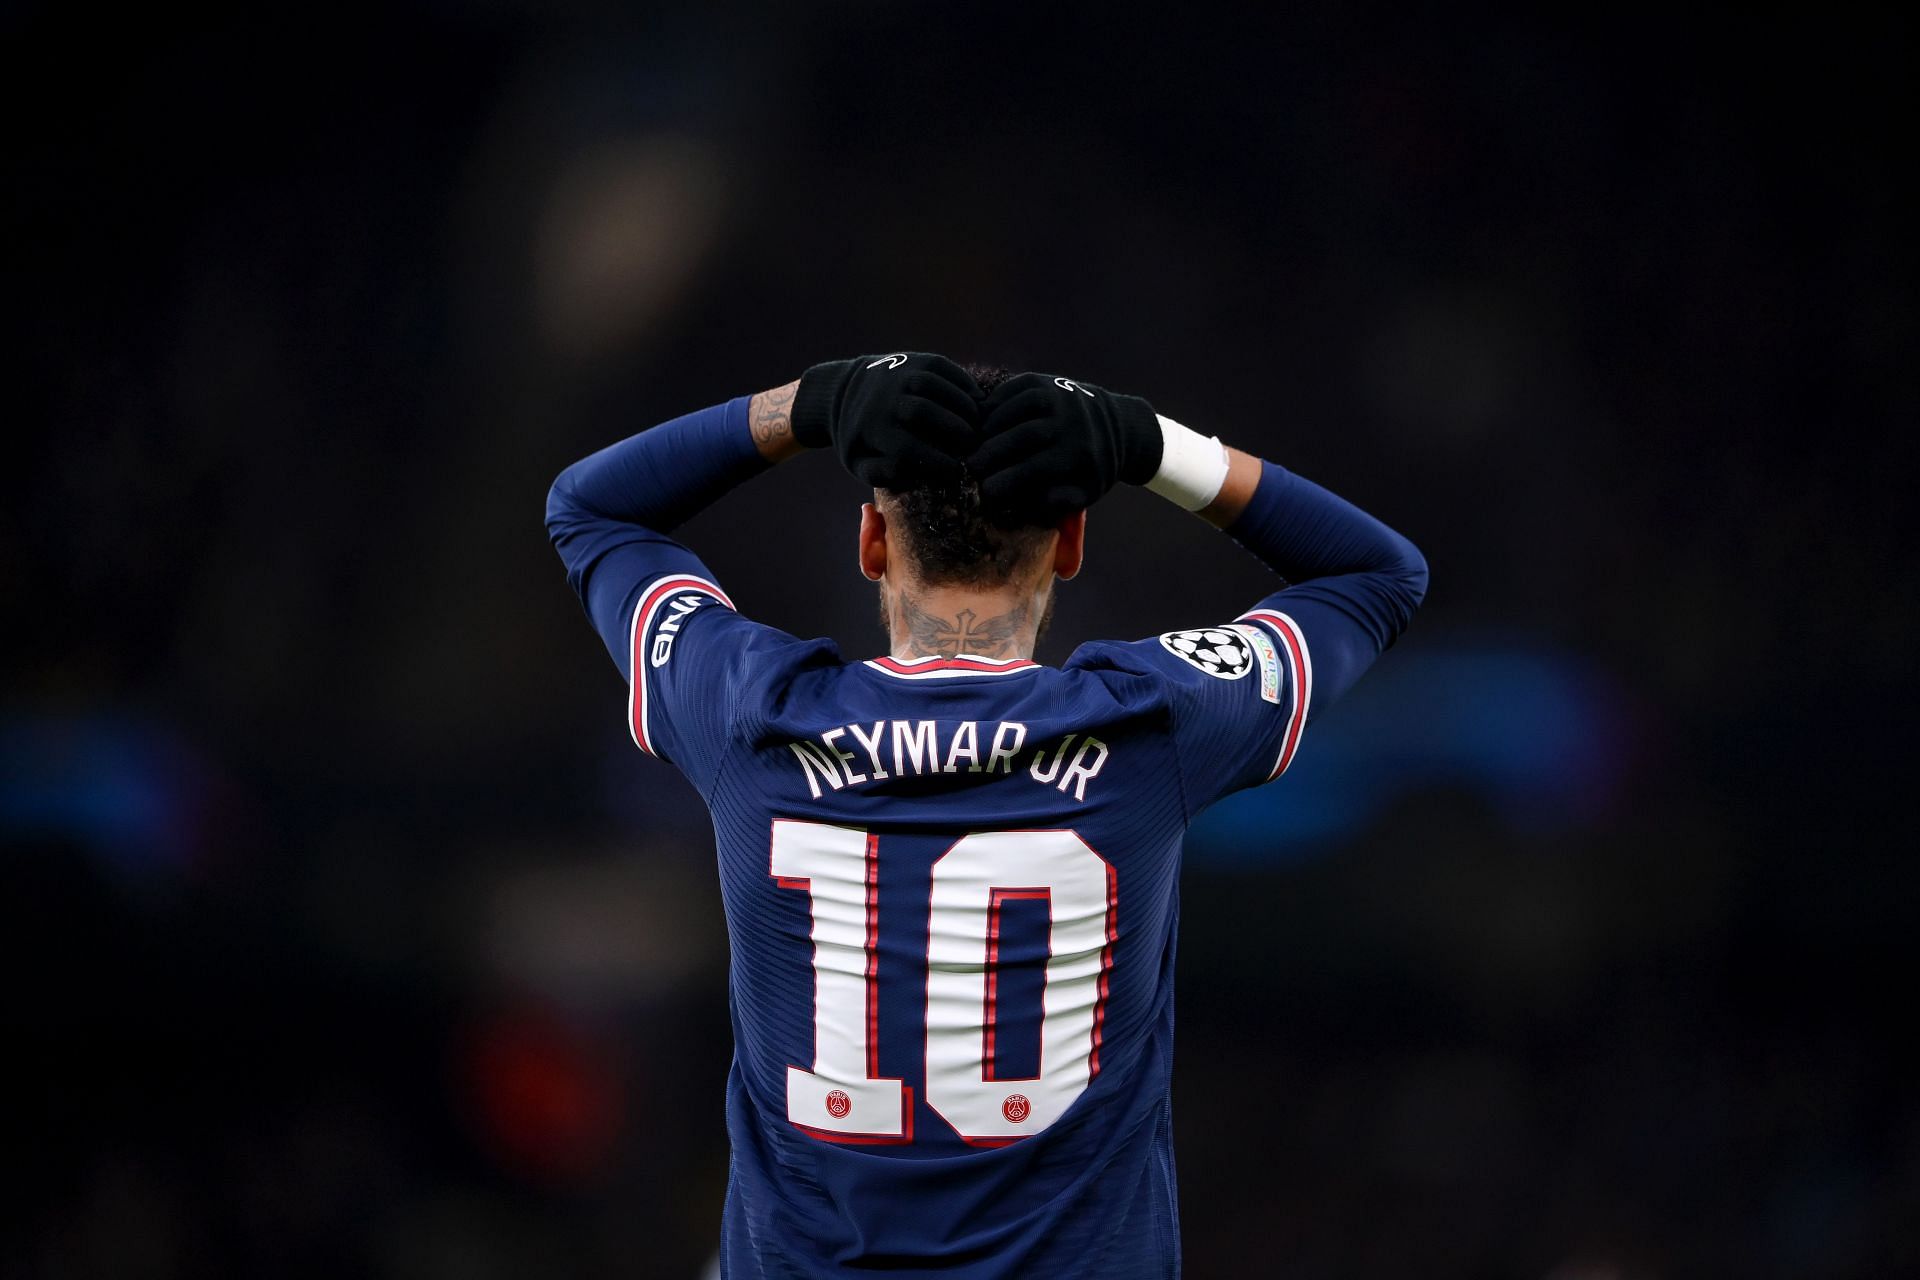 Neymar Jr. has struggled with injuries once again this season, missing a sizeable number of games.